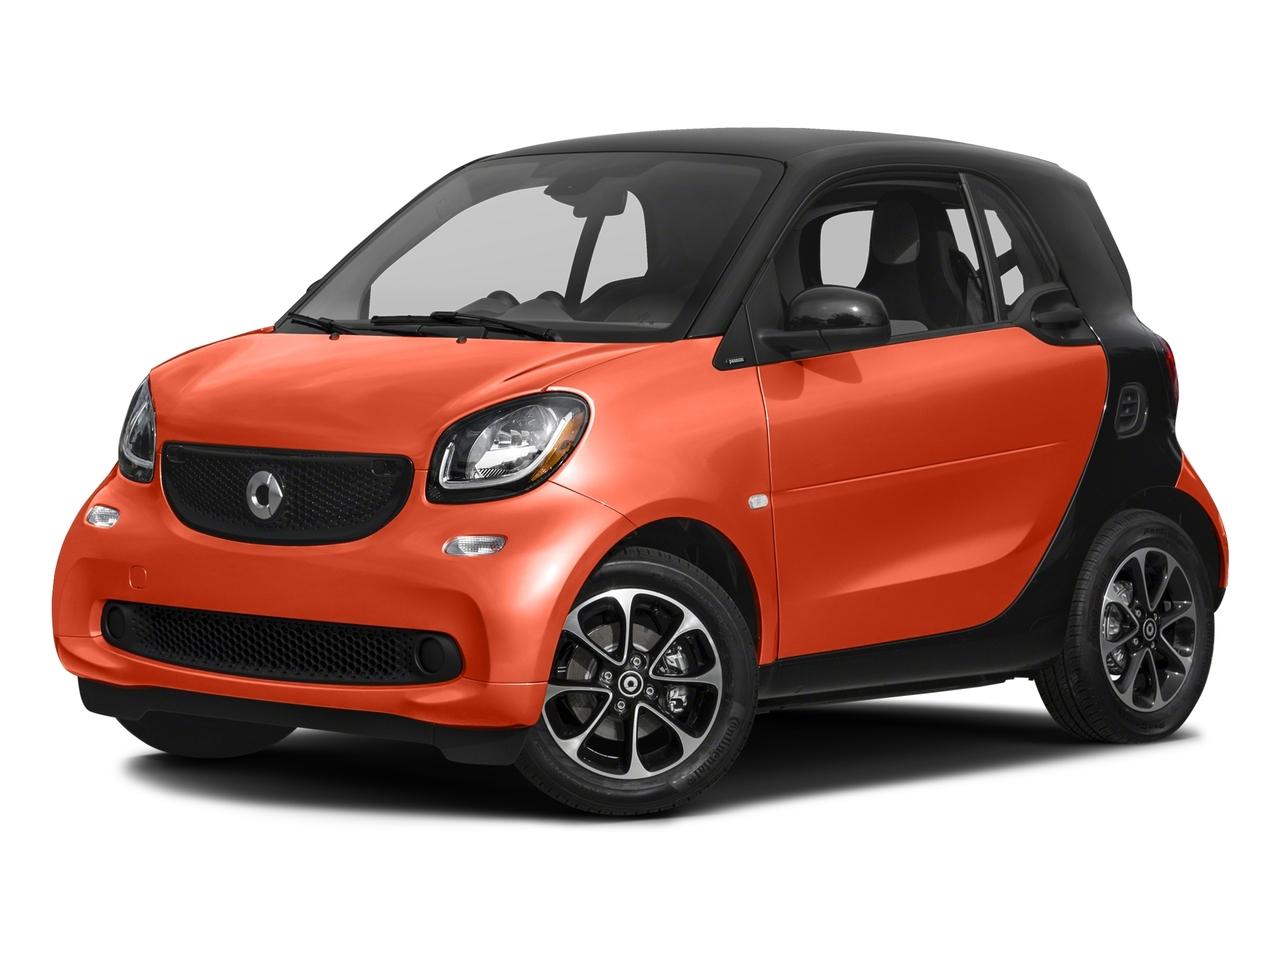 2016 smart fortwo Vehicle Photo in Pinellas Park , FL 33781